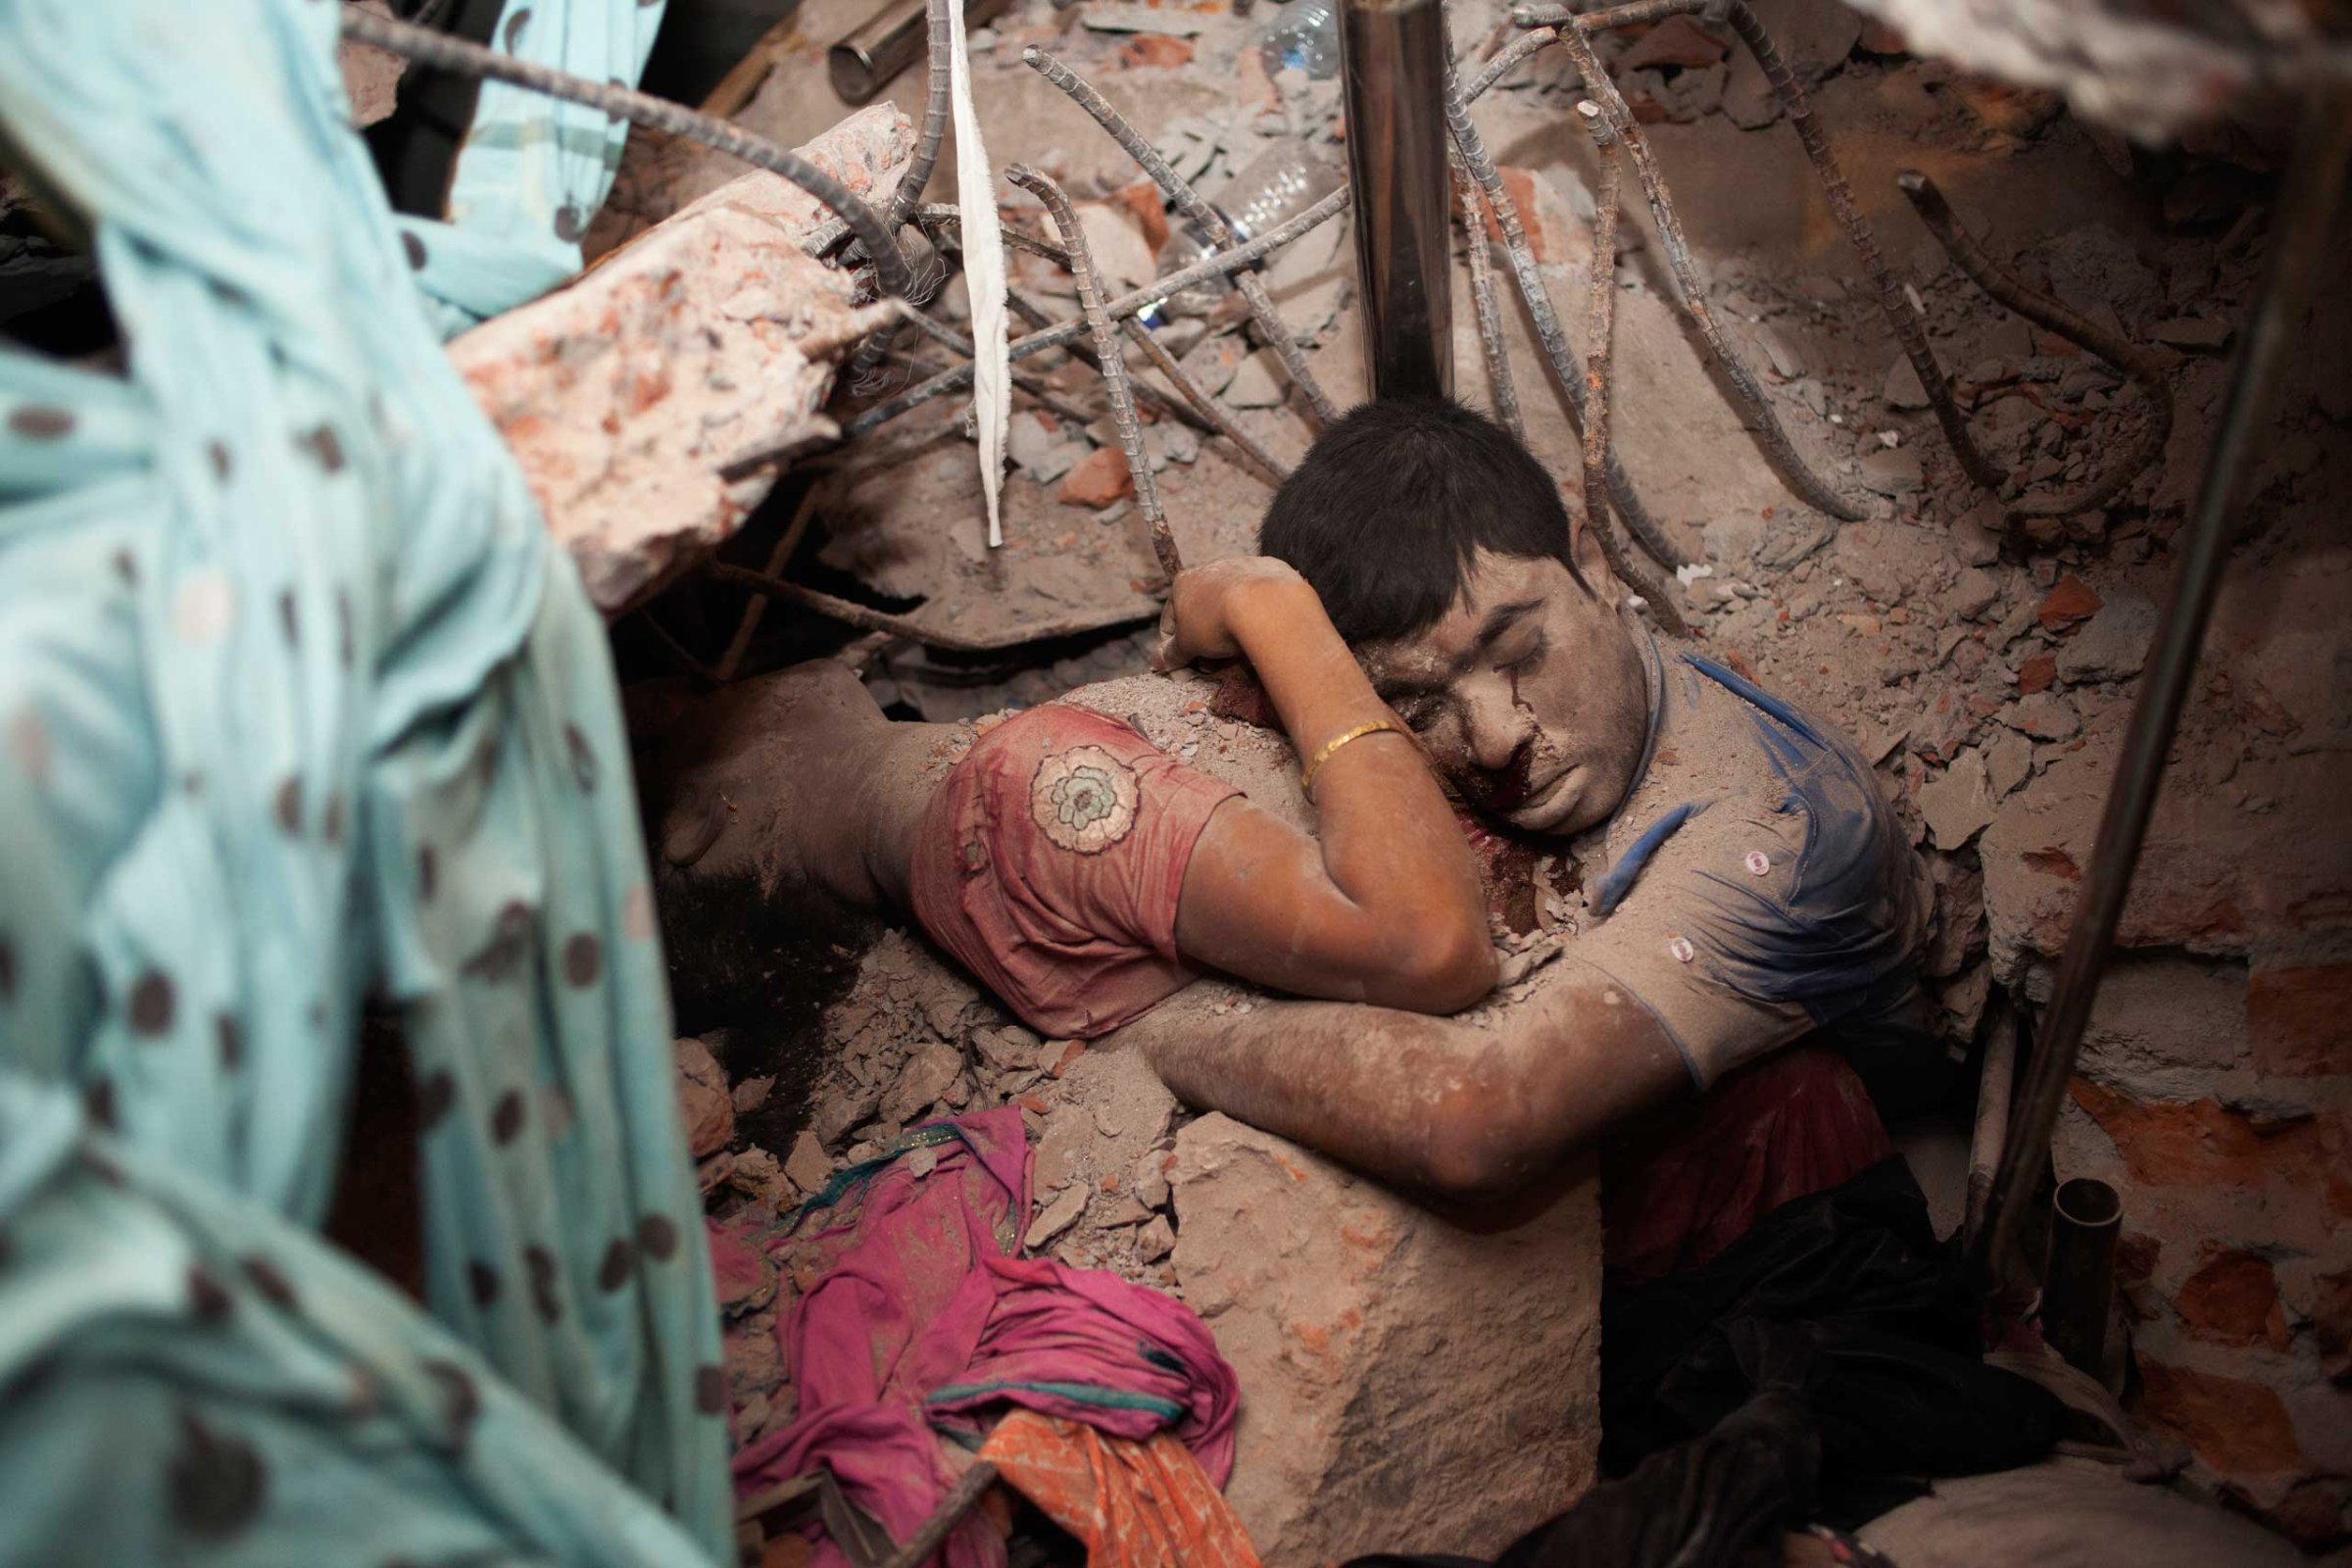 April 25, 2013. Two victims amid the rubble of a garment factory building collapse in Savar, near Dhaka, Bangladesh.